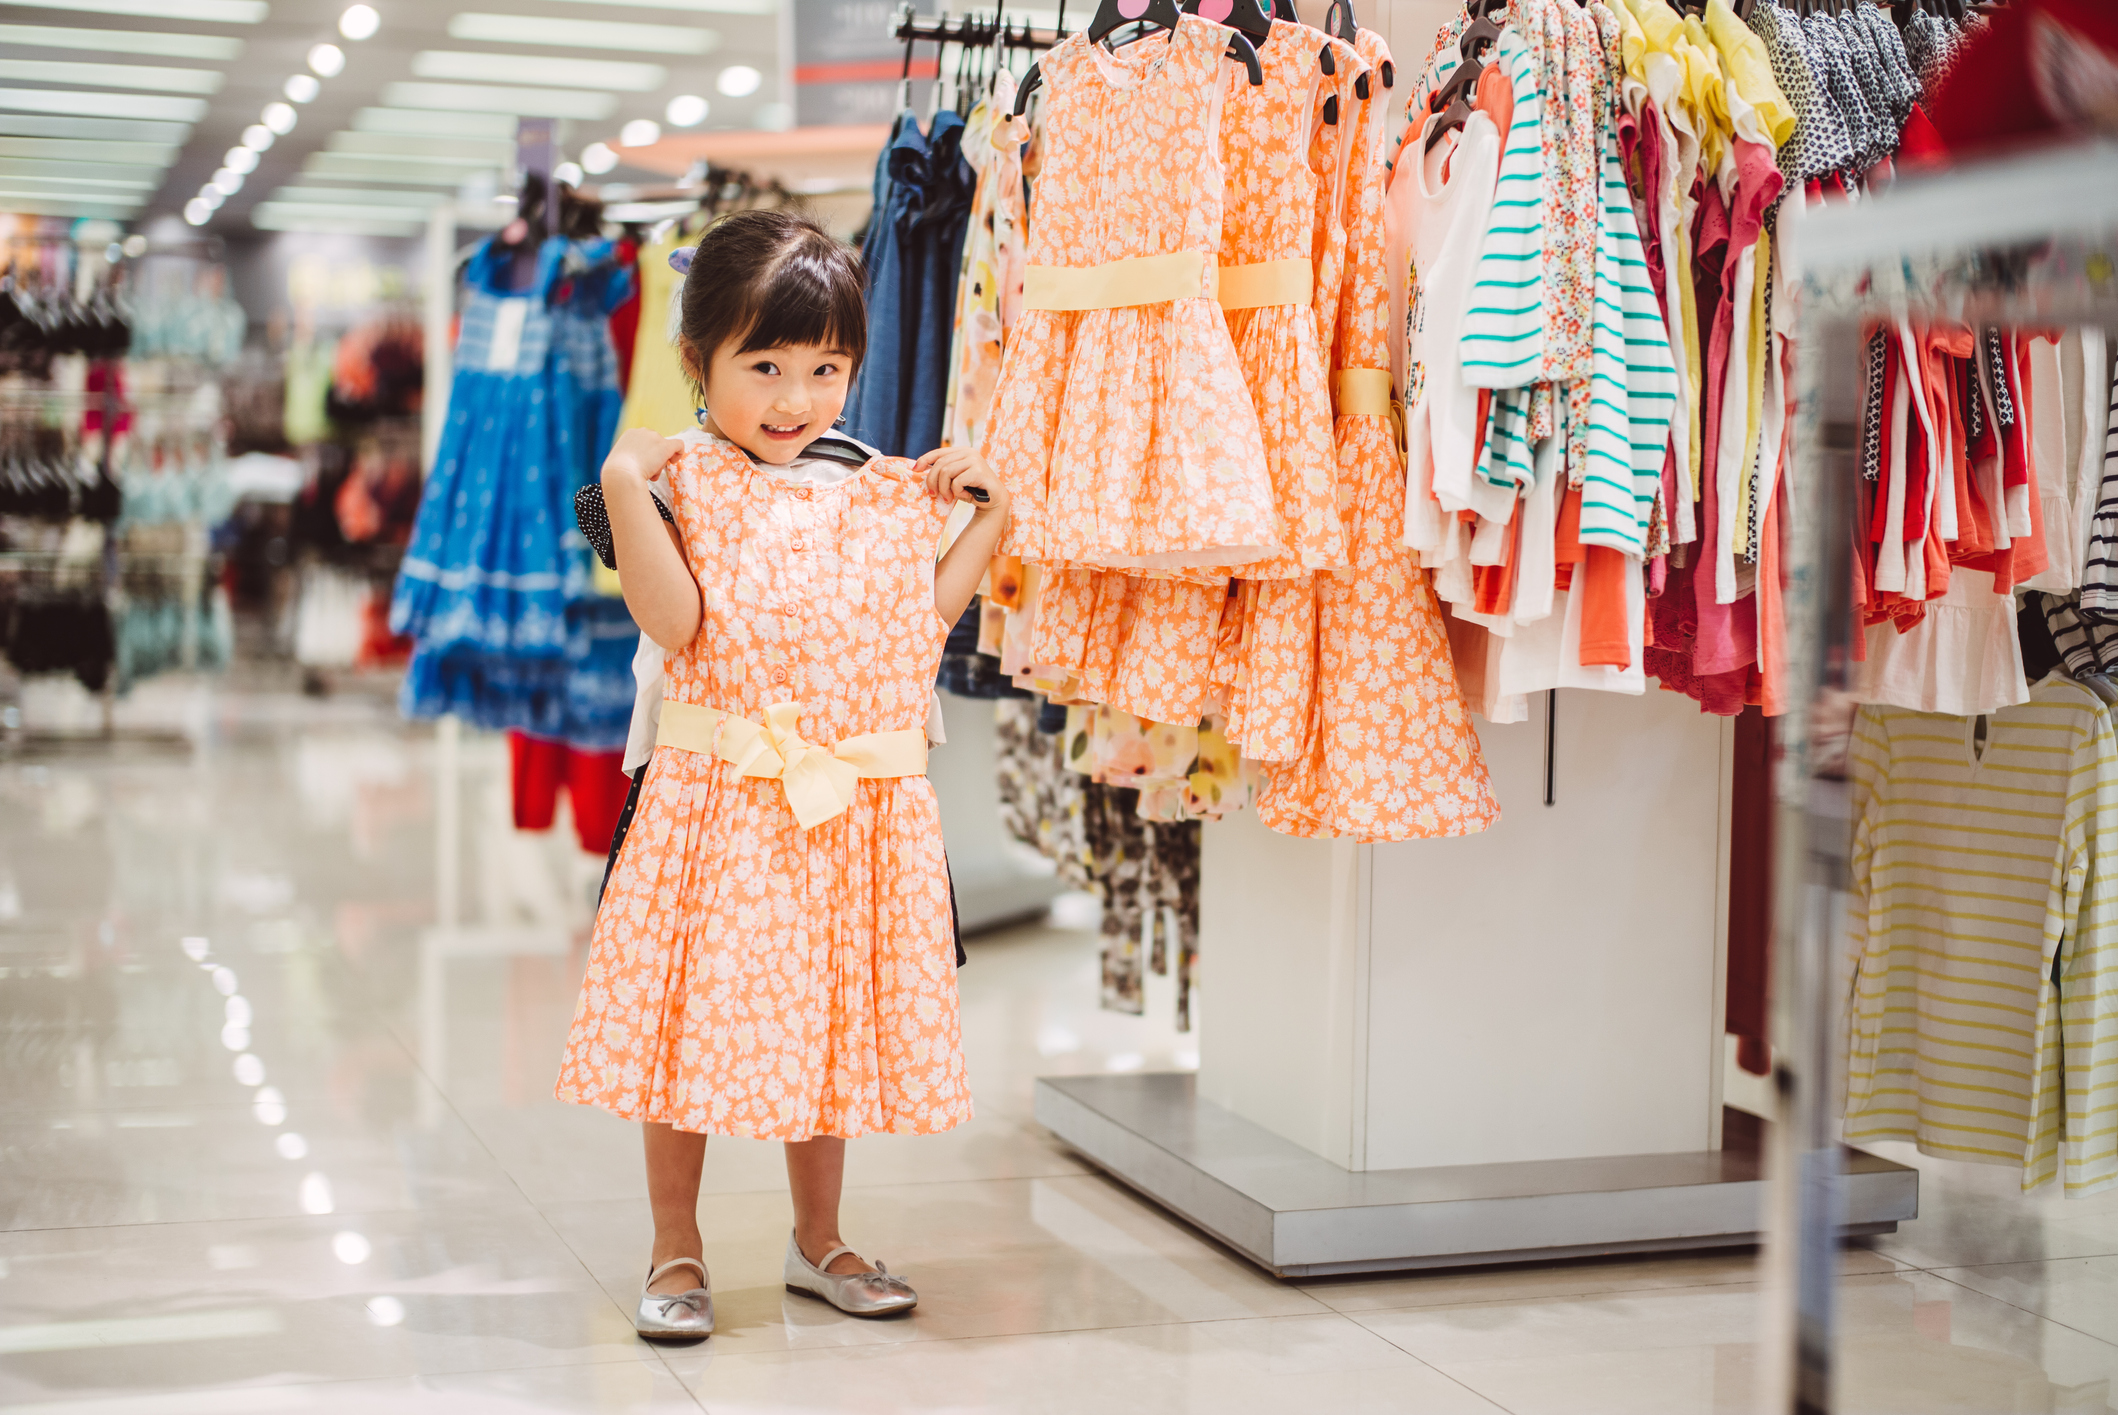 Lovely little girl trying out new dress at department store while looking in the camera joyfully